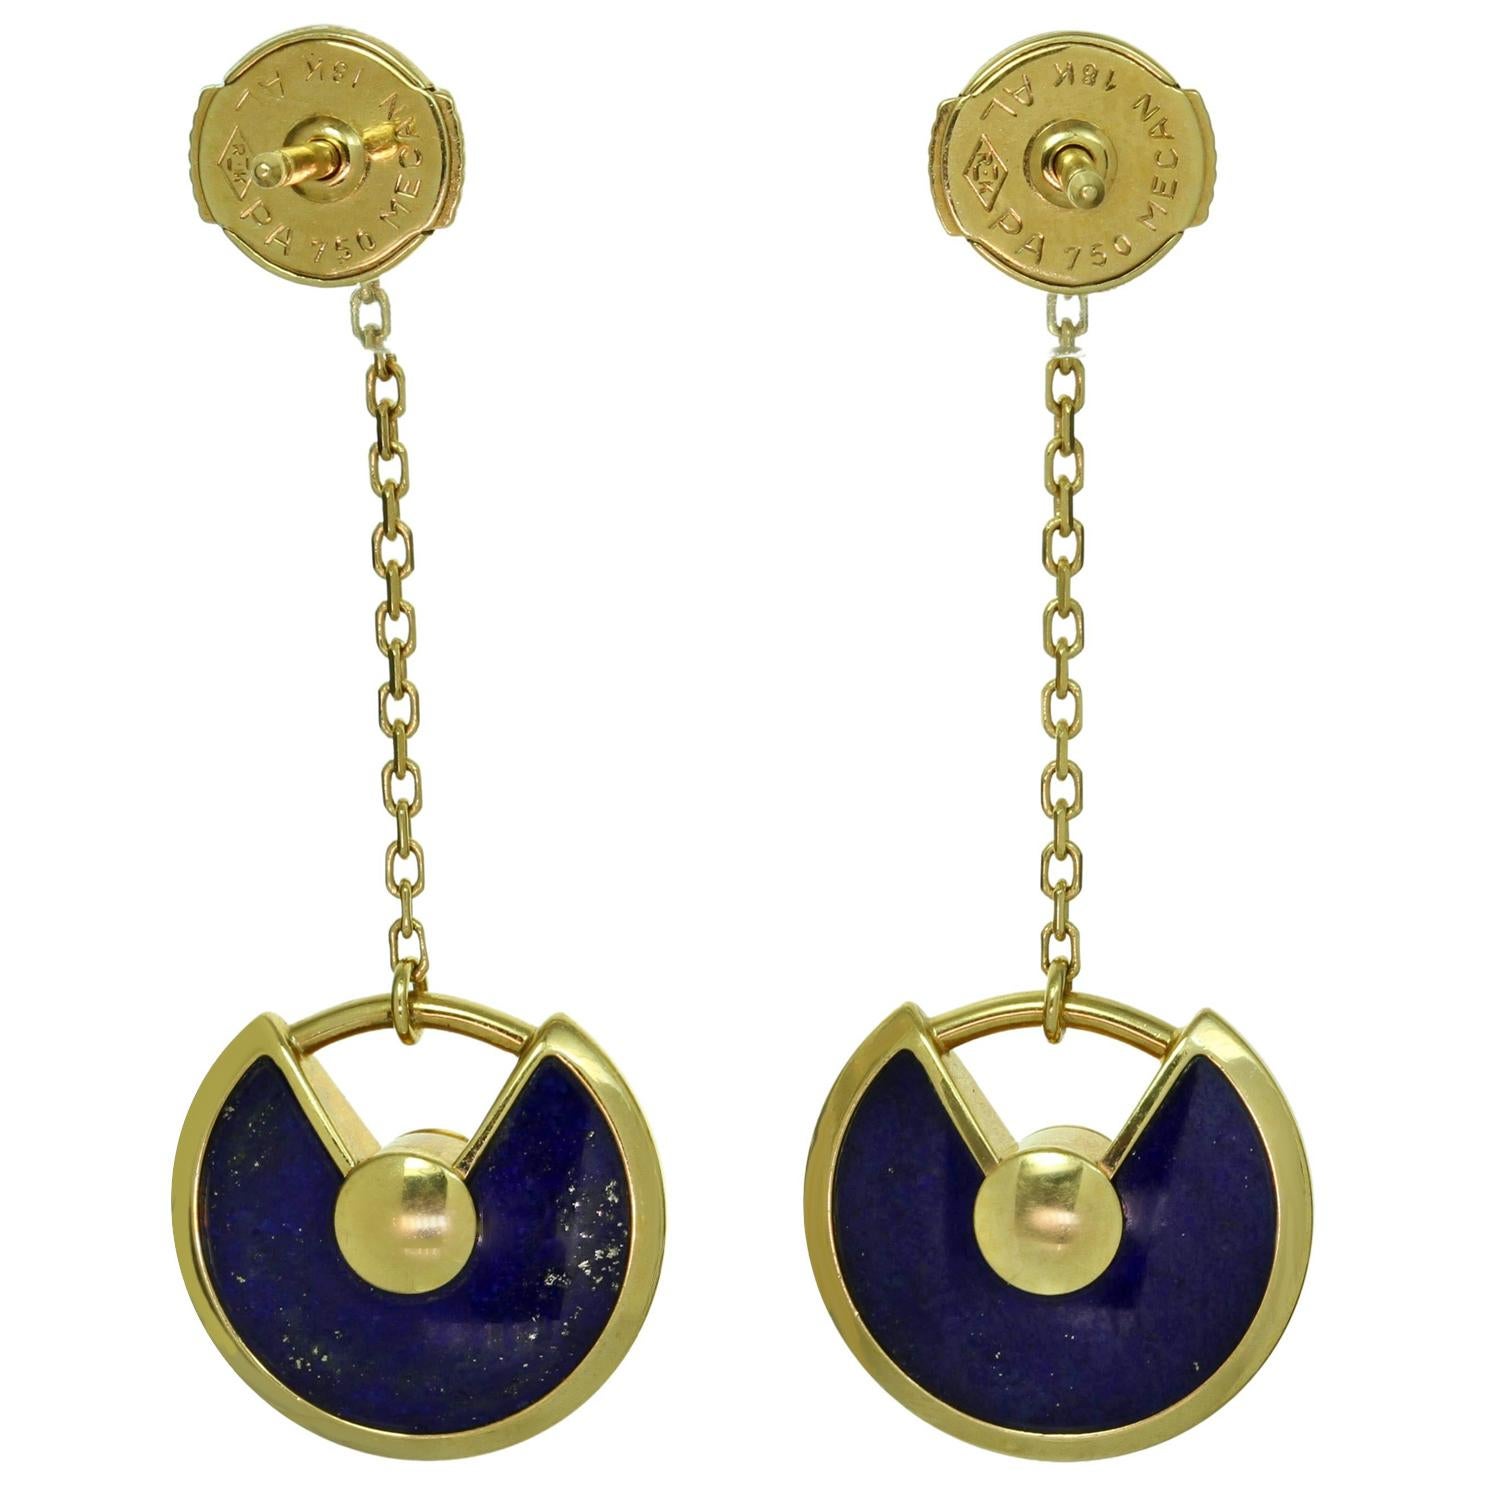 These gorgeous earrings from the Amulette de CARTIER collection are crafted in 18k yellow gold and feature dagling lapis lazuli discs suspended from bezel-set solitaire diamonds and accented with a brilliant-cut round diamonds in the center. The D-F